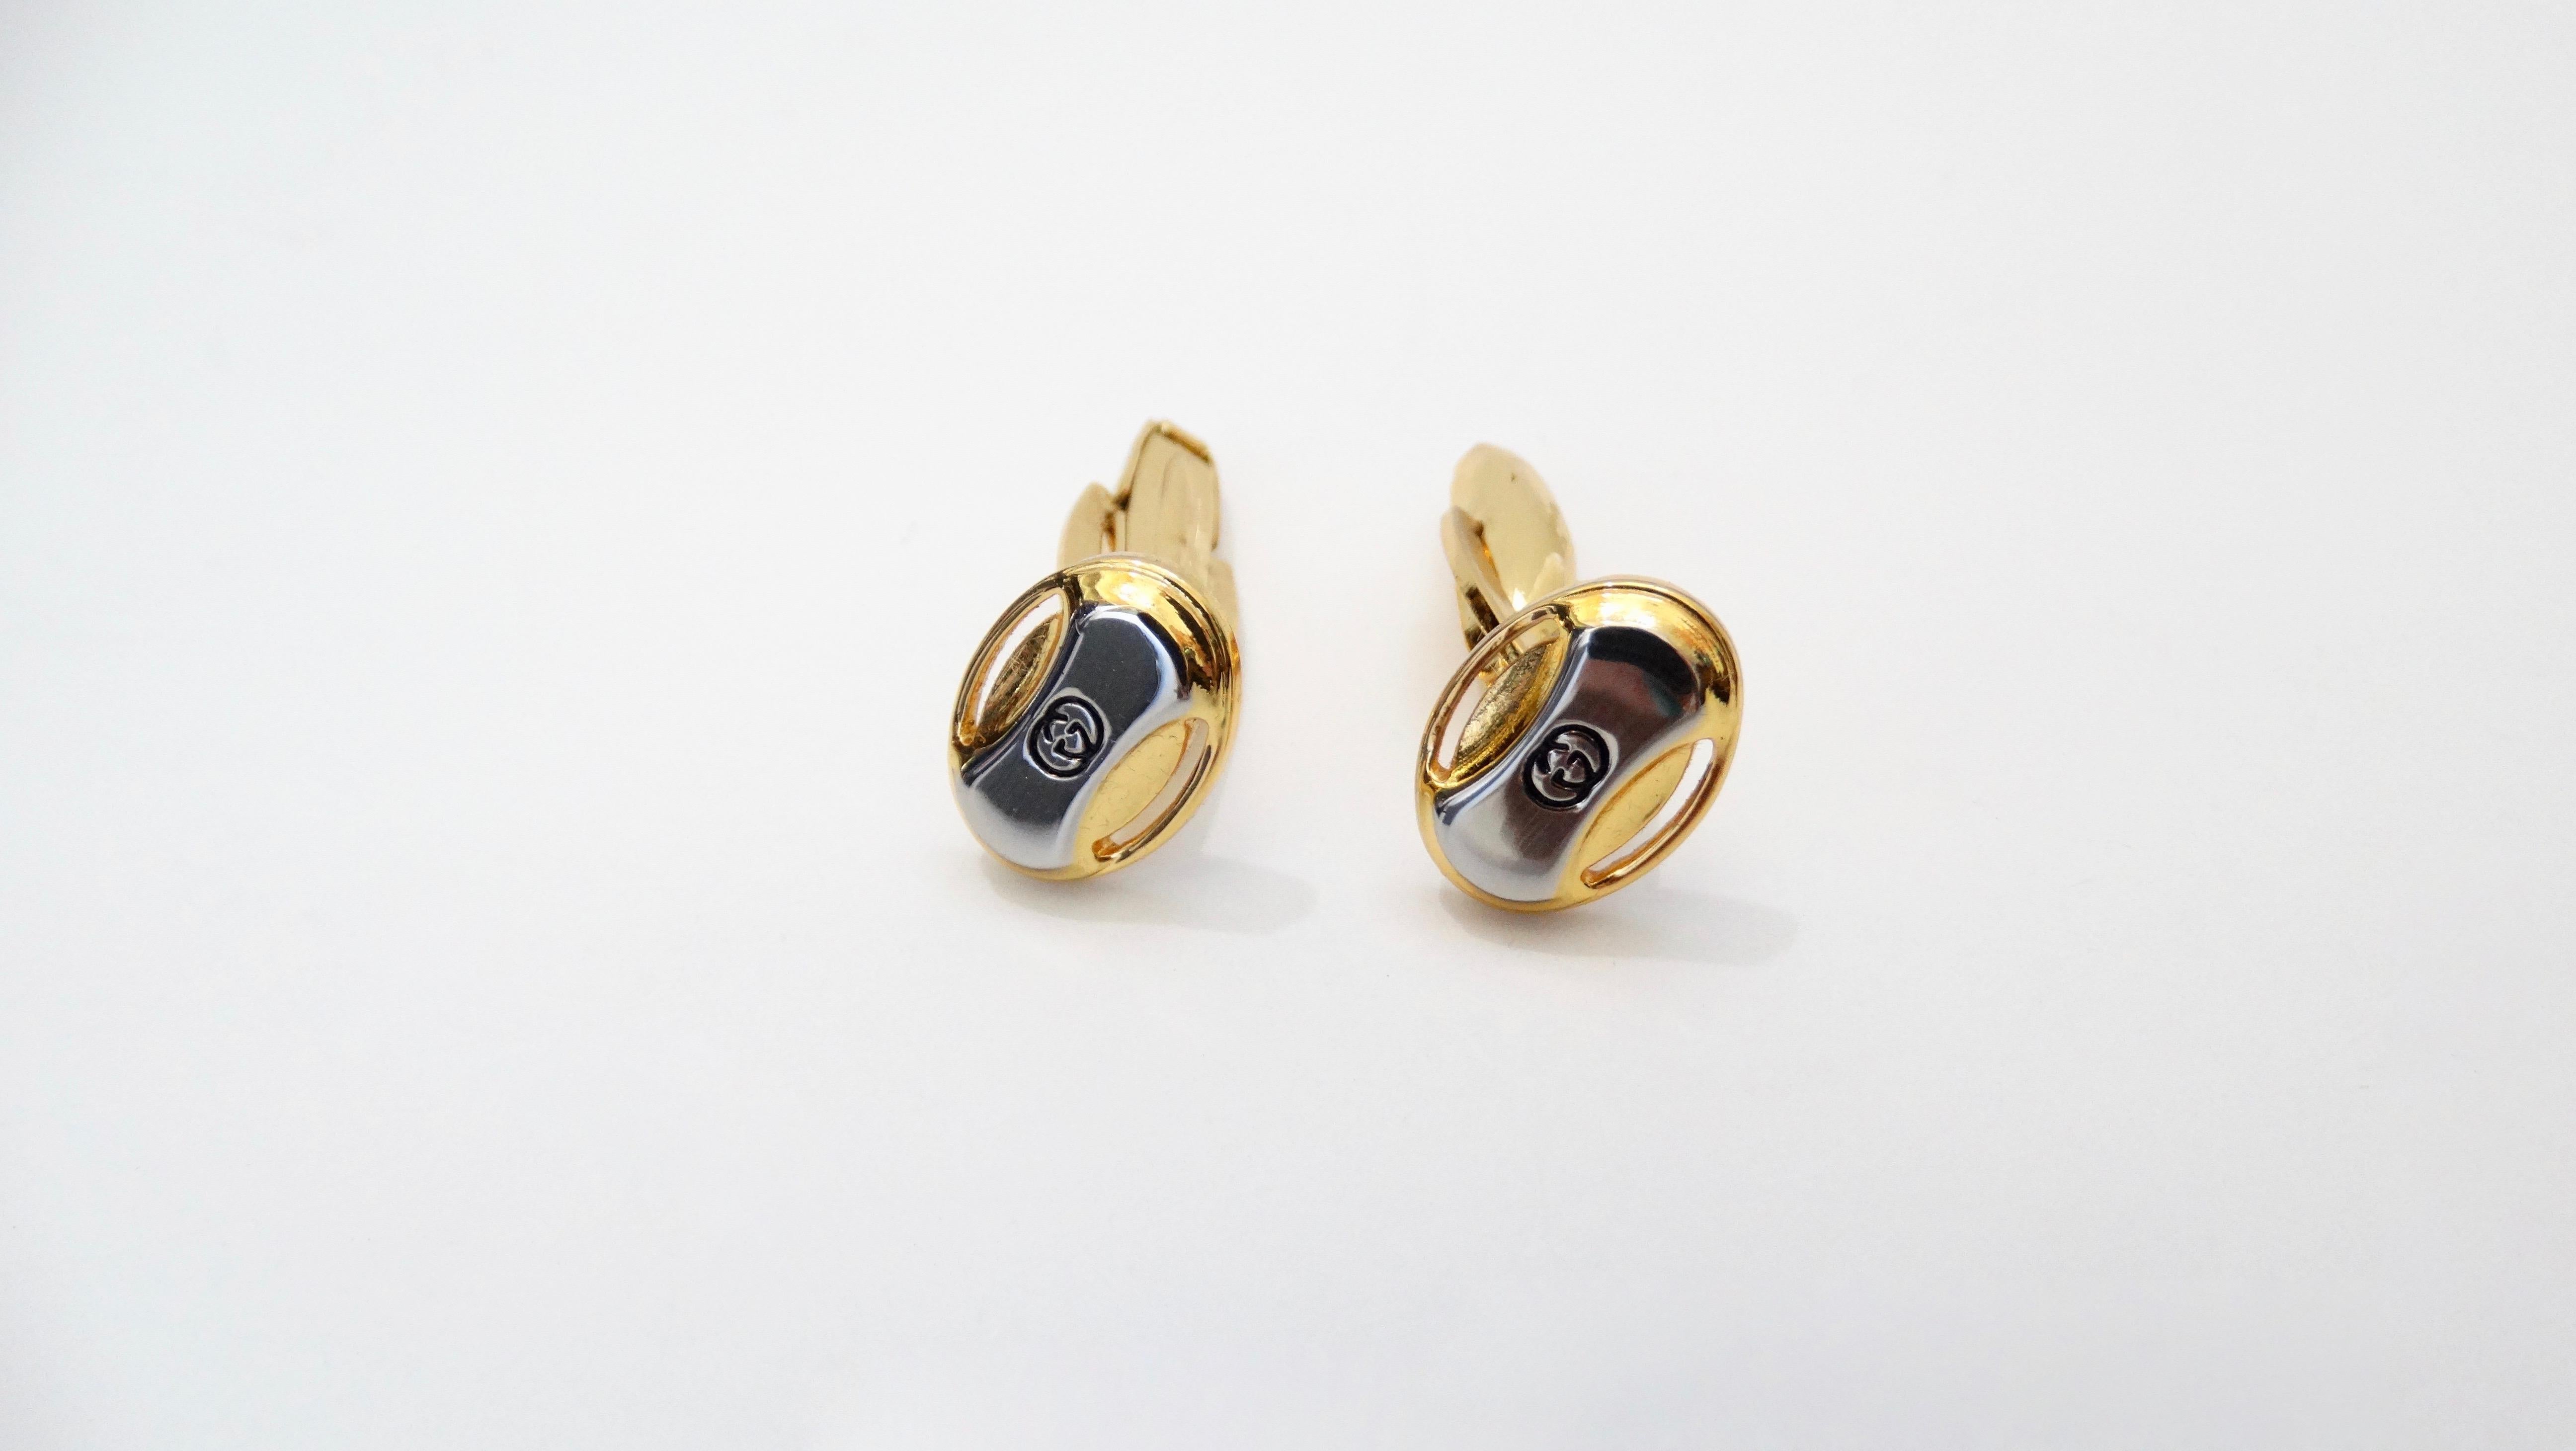 Stay in style with this Gucci cufflink and tie clip set! Circa 1980s, these cuff links and tie clip are plated in contrasting silver and gold hardware and feature the signature Gucci logo. Classic and simple, this set is sure to elevate your